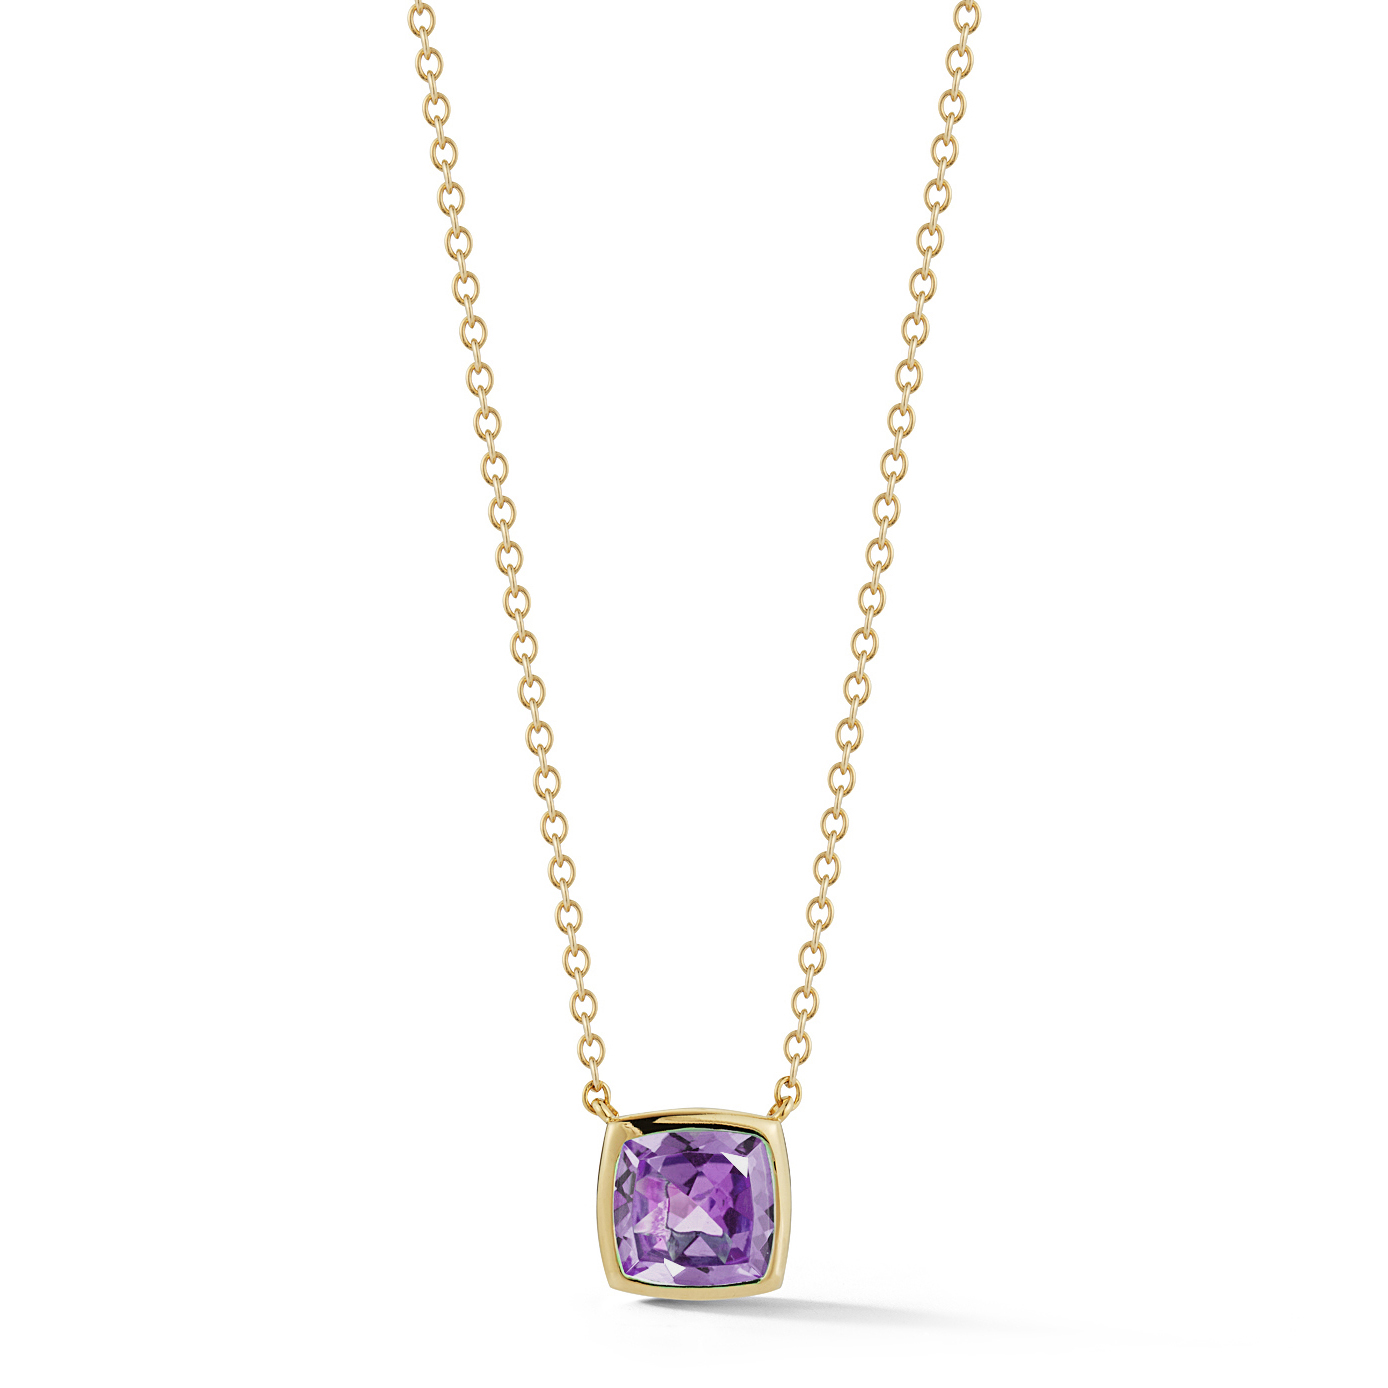 A & Furst 18k Yellow Gold Amethyst Pendant Necklace